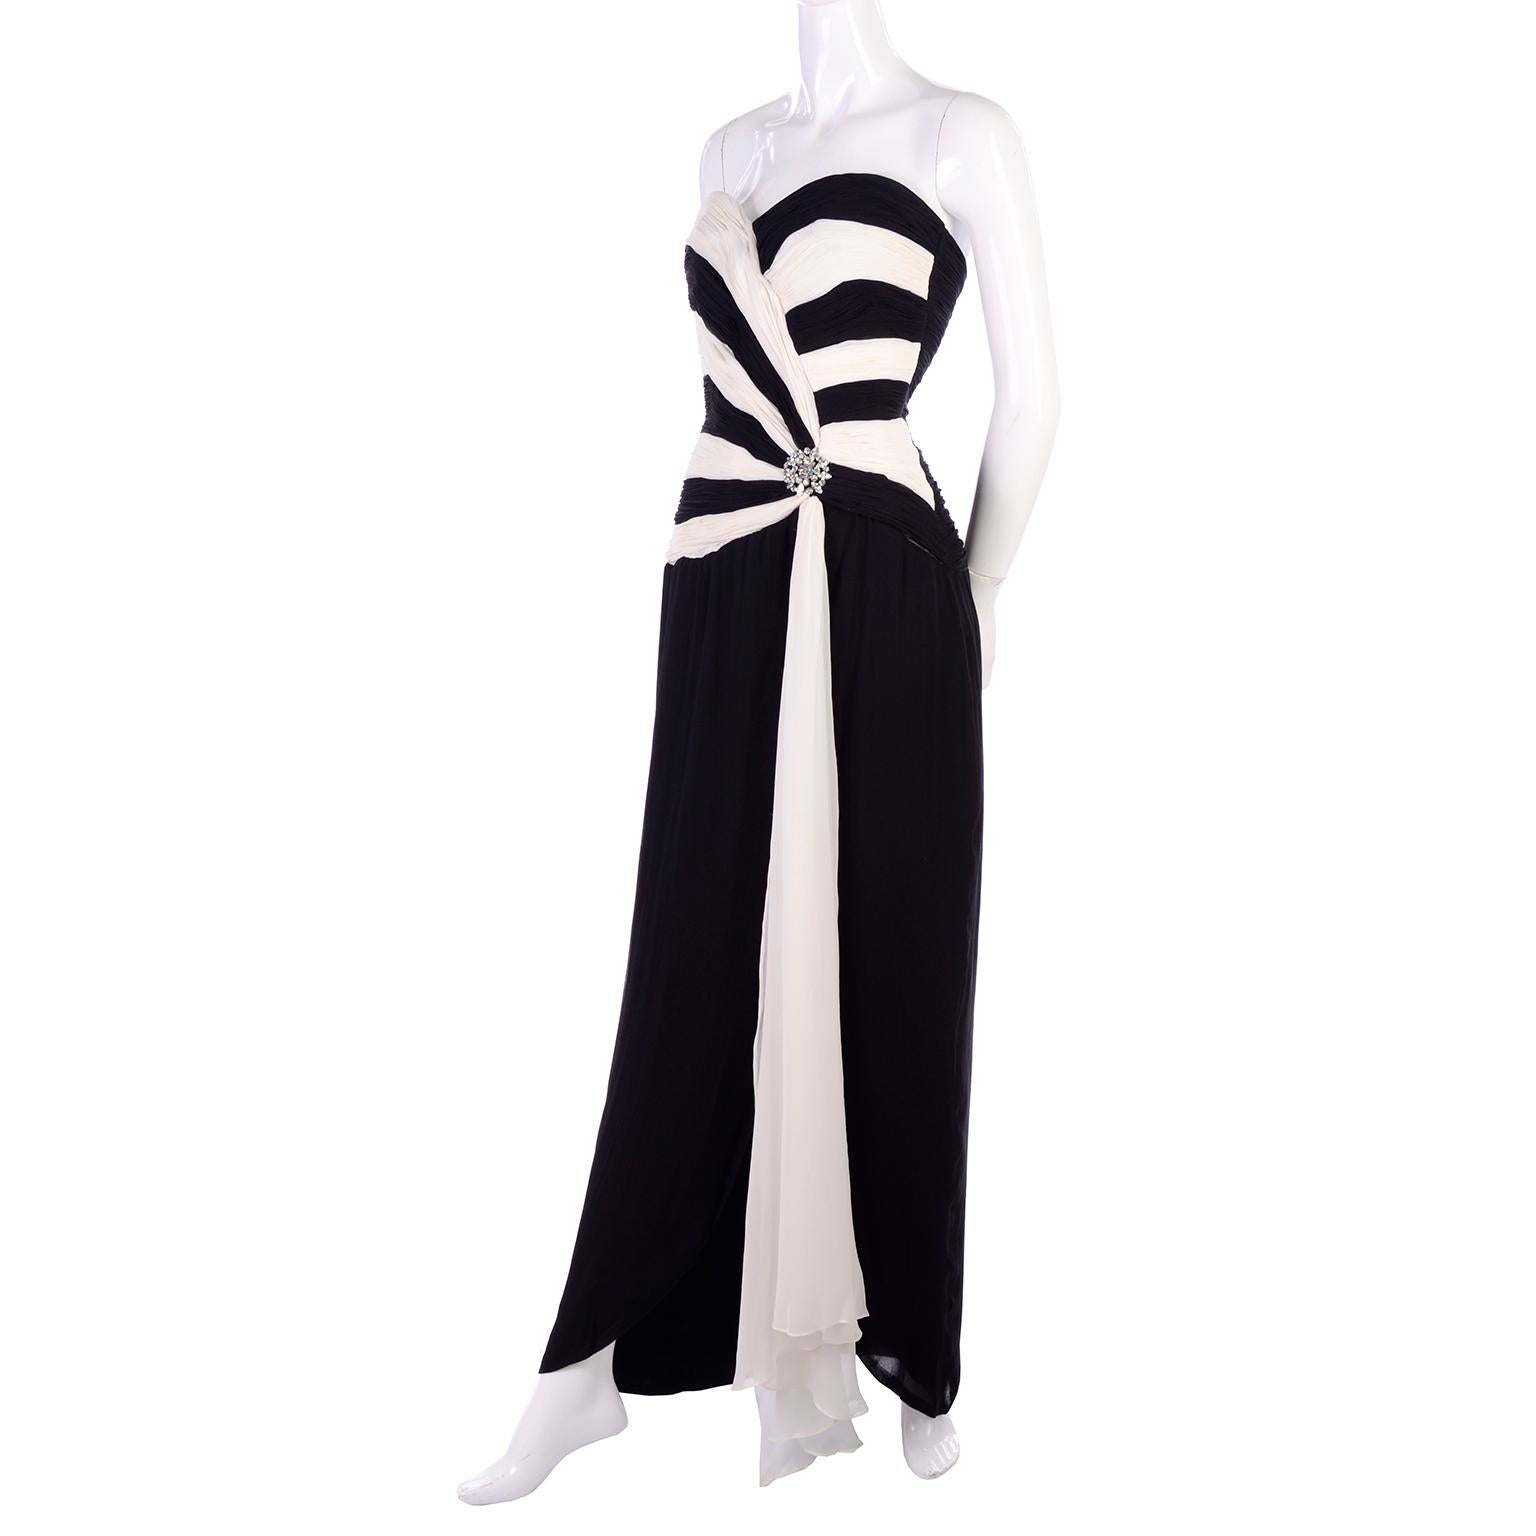 This is a stunningly elegant evening gown in black and white silk chiffon. The dress has 